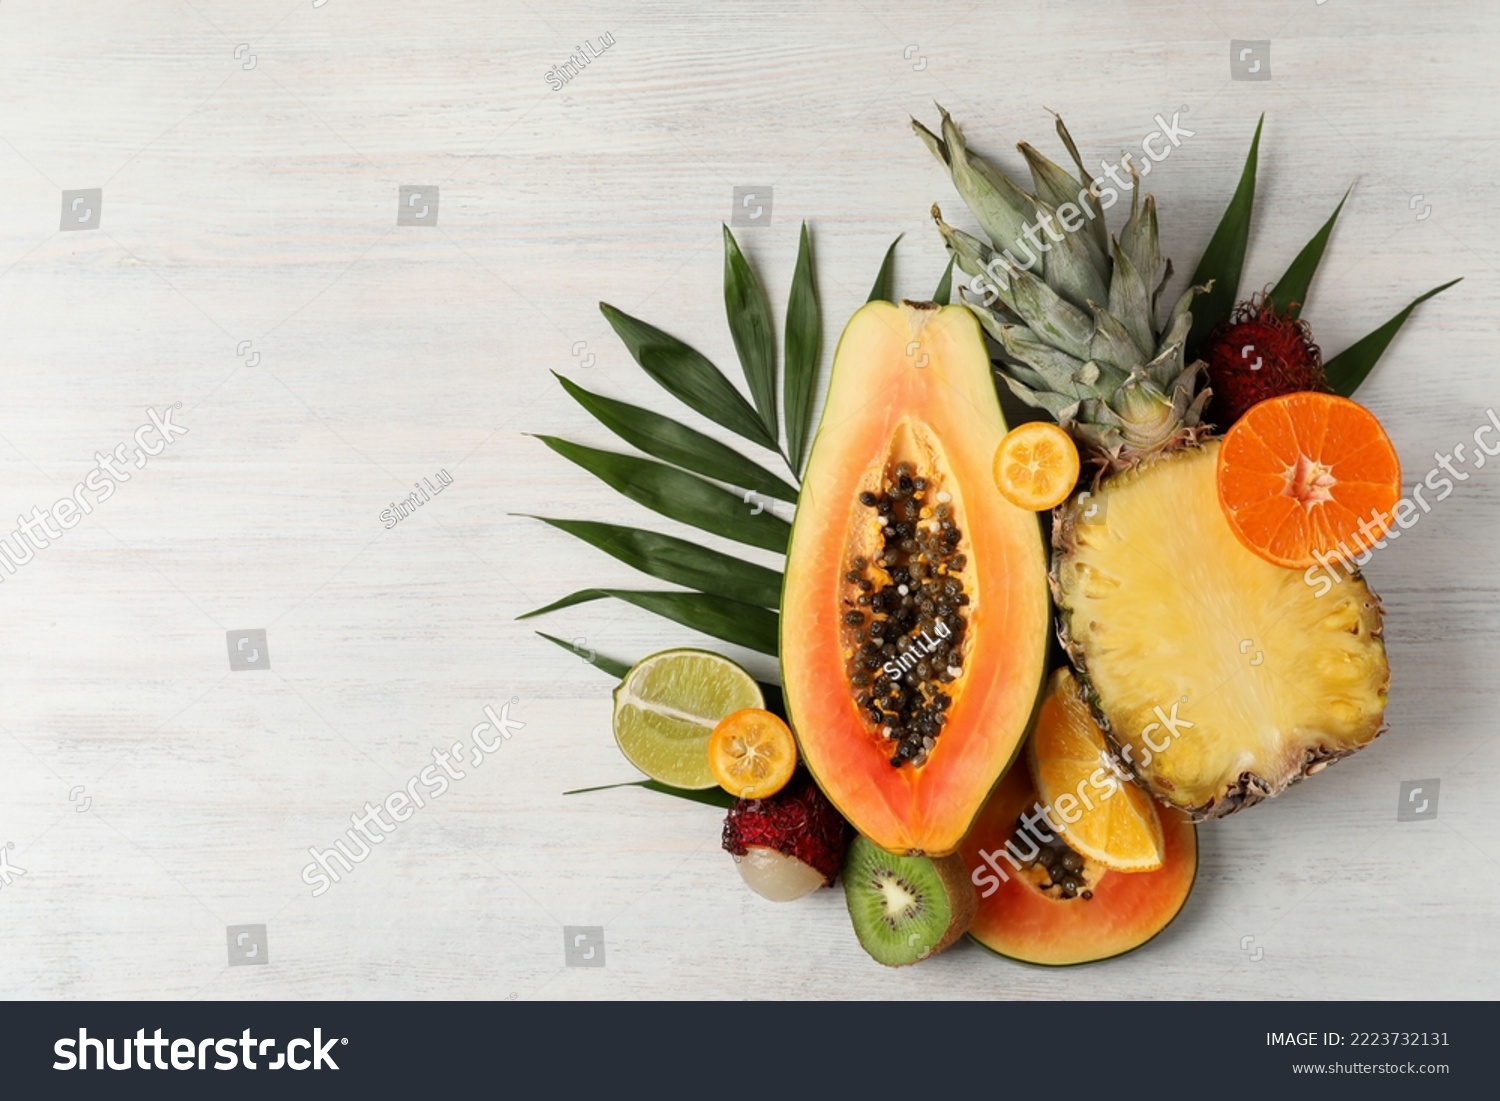 Exotic fruits on white wooden background, space for text. #2223732131